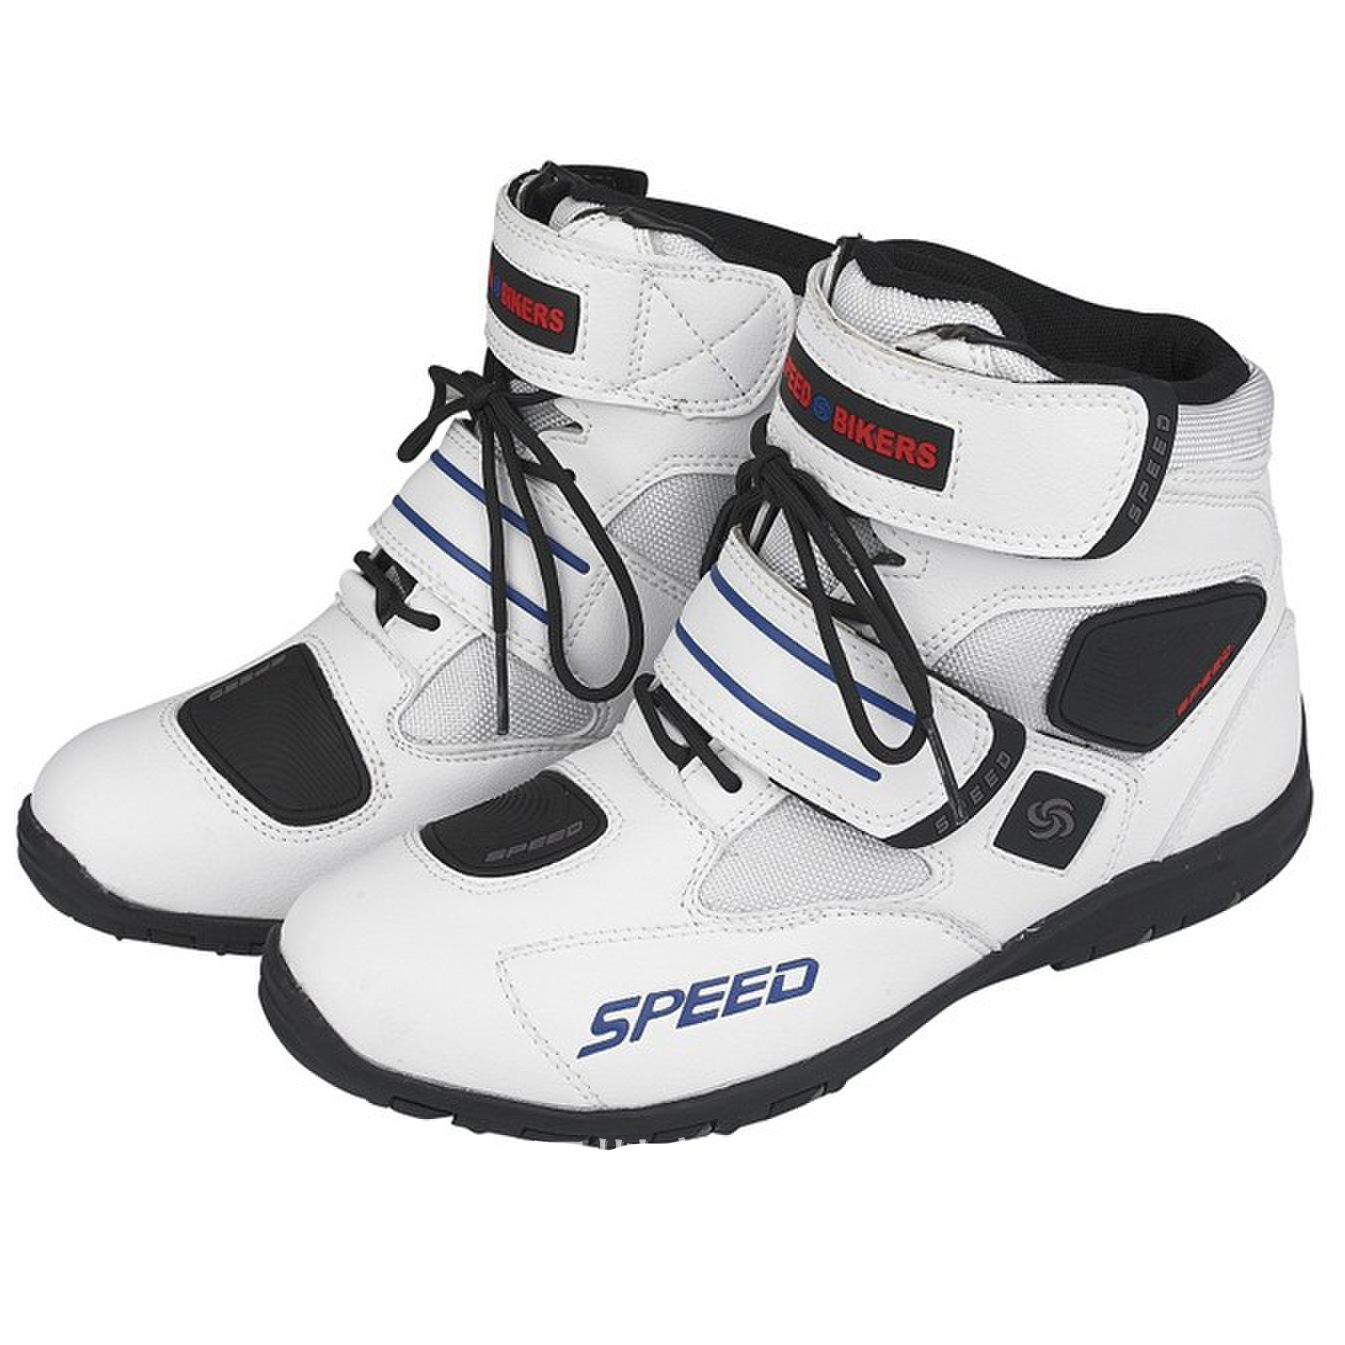 Soft Motorcycle Boots Biker Waterproof Speed Motorboats Men Motocross Boots Non-slip Motorcycle Shoes Color:white Shoe US Size:9 - image 1 of 7